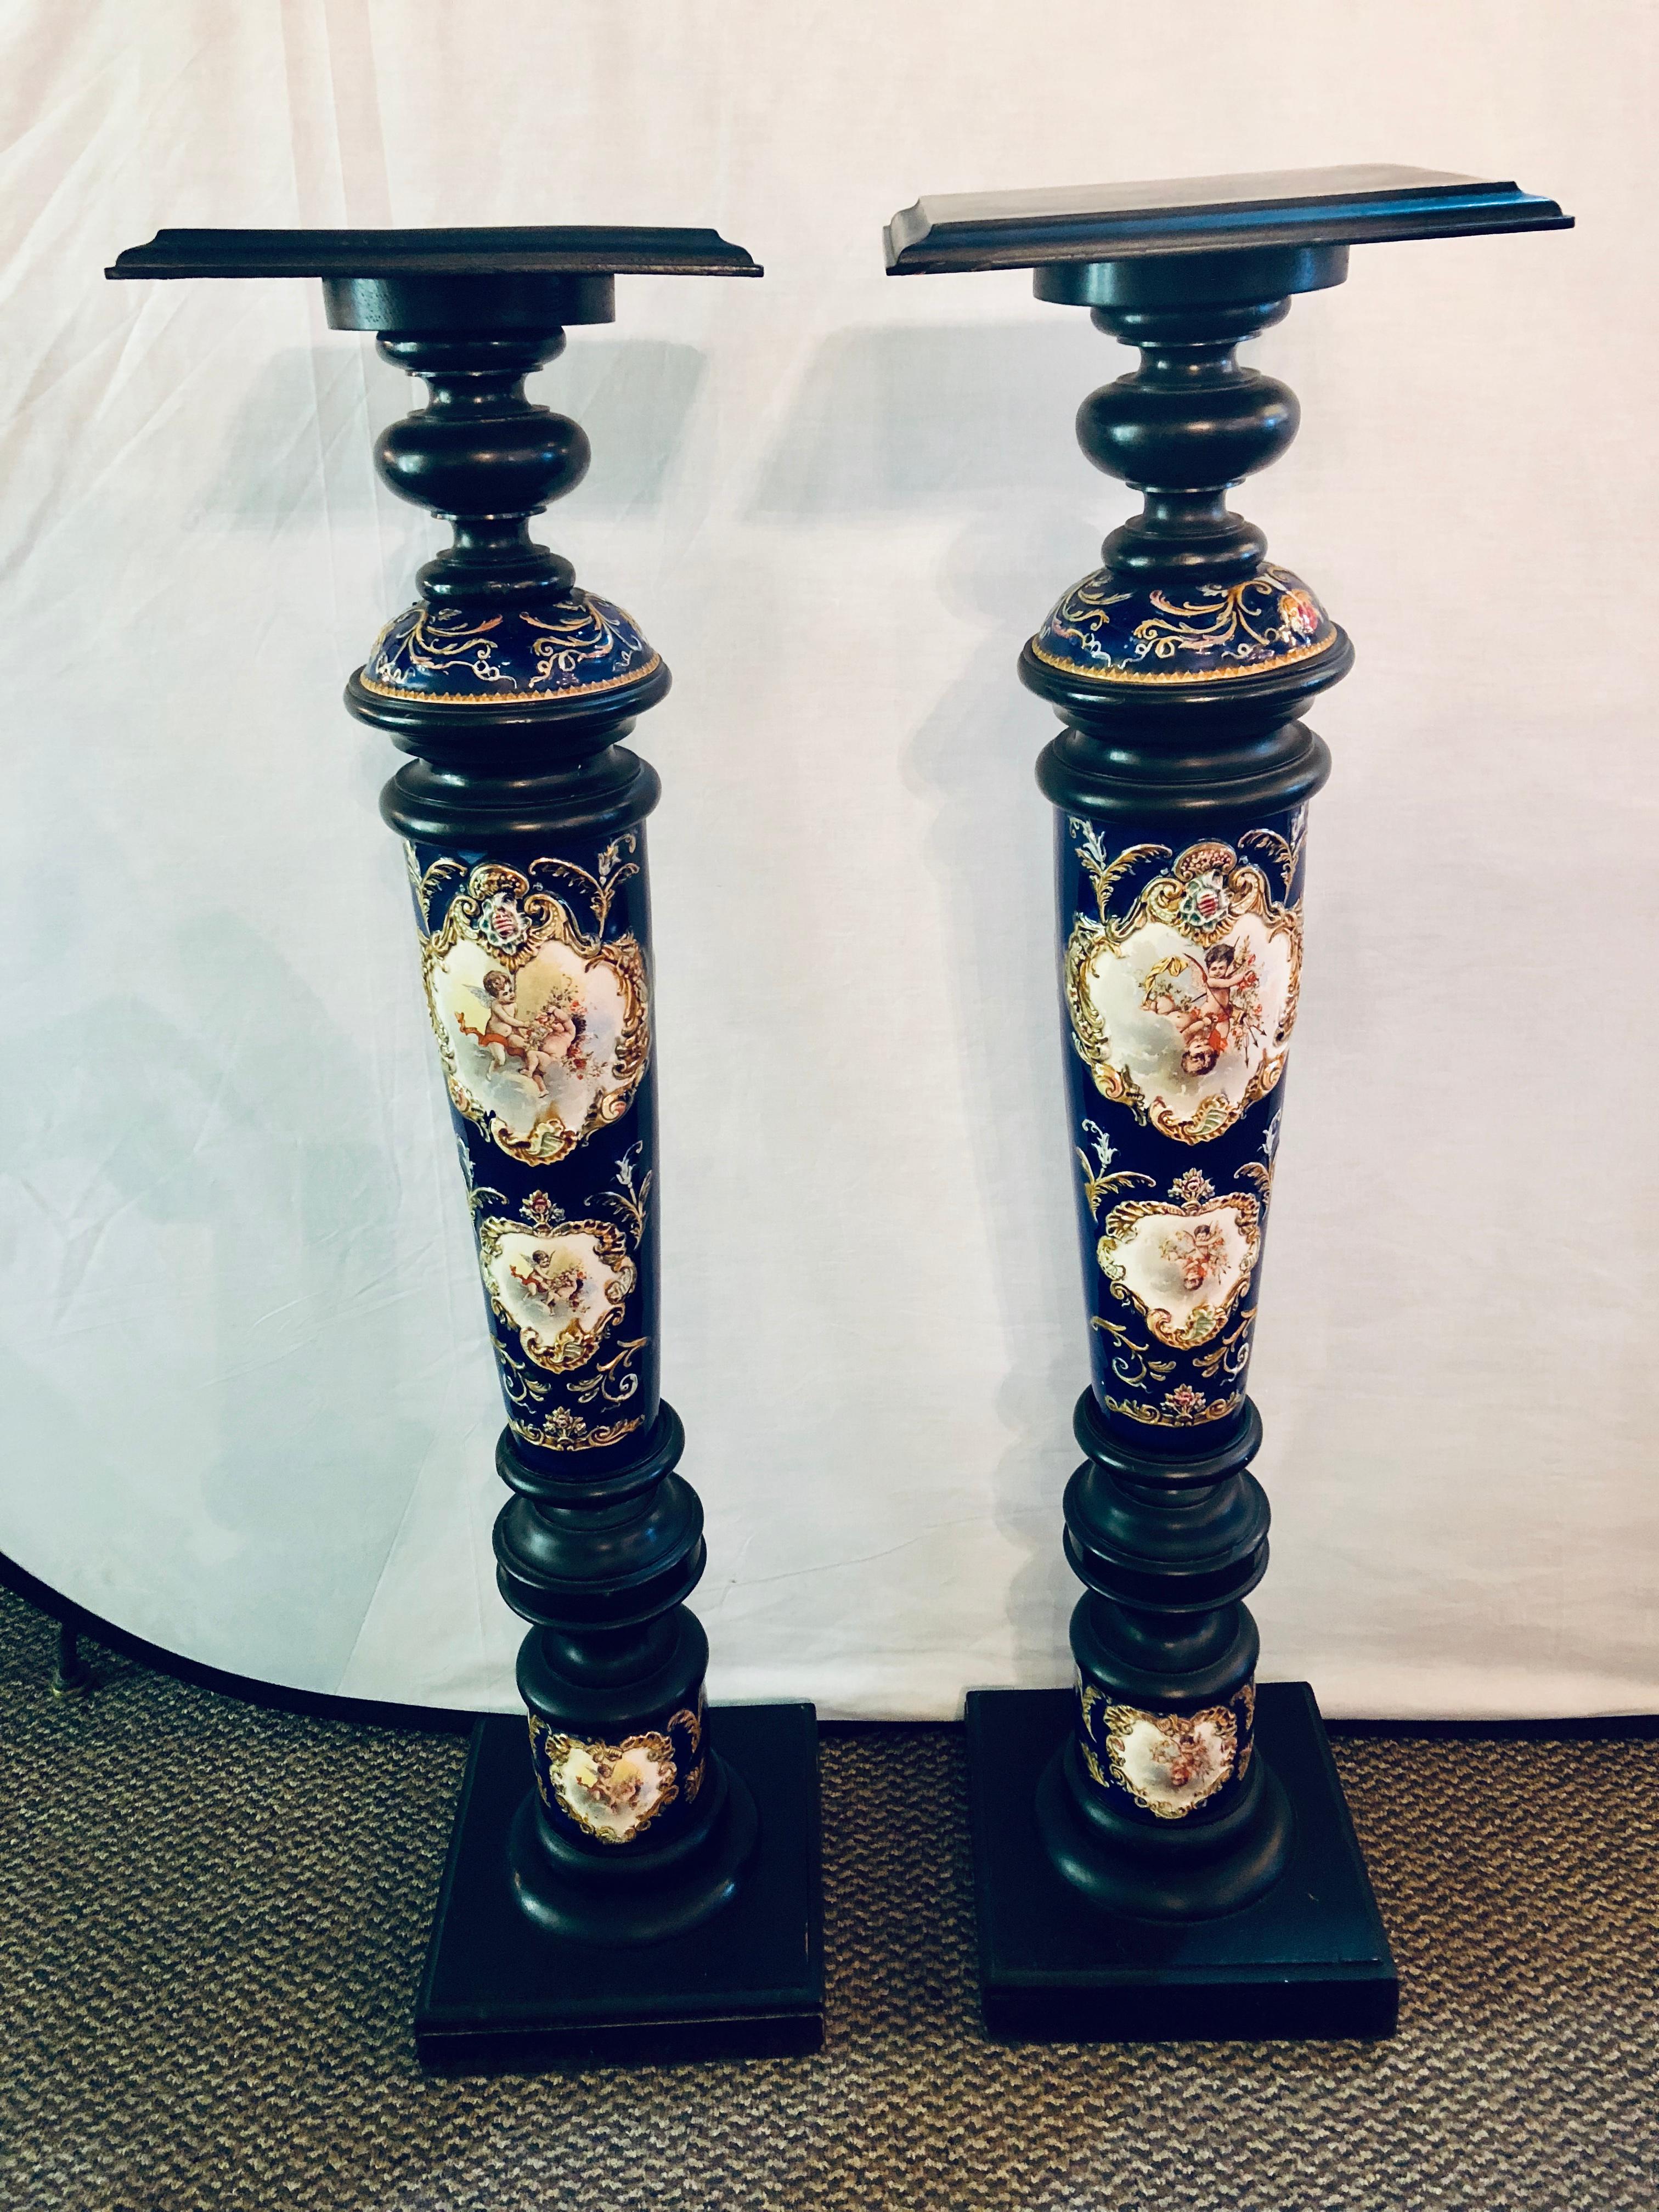 A pair of royal Vienna style porcelain and ebony column pedestals. A fine and highly decorative pair of pedestals each having ebony square table tops on wonderfully hand painted porcelain cherub scene cobalt blue columns supported by ebony bottoms.